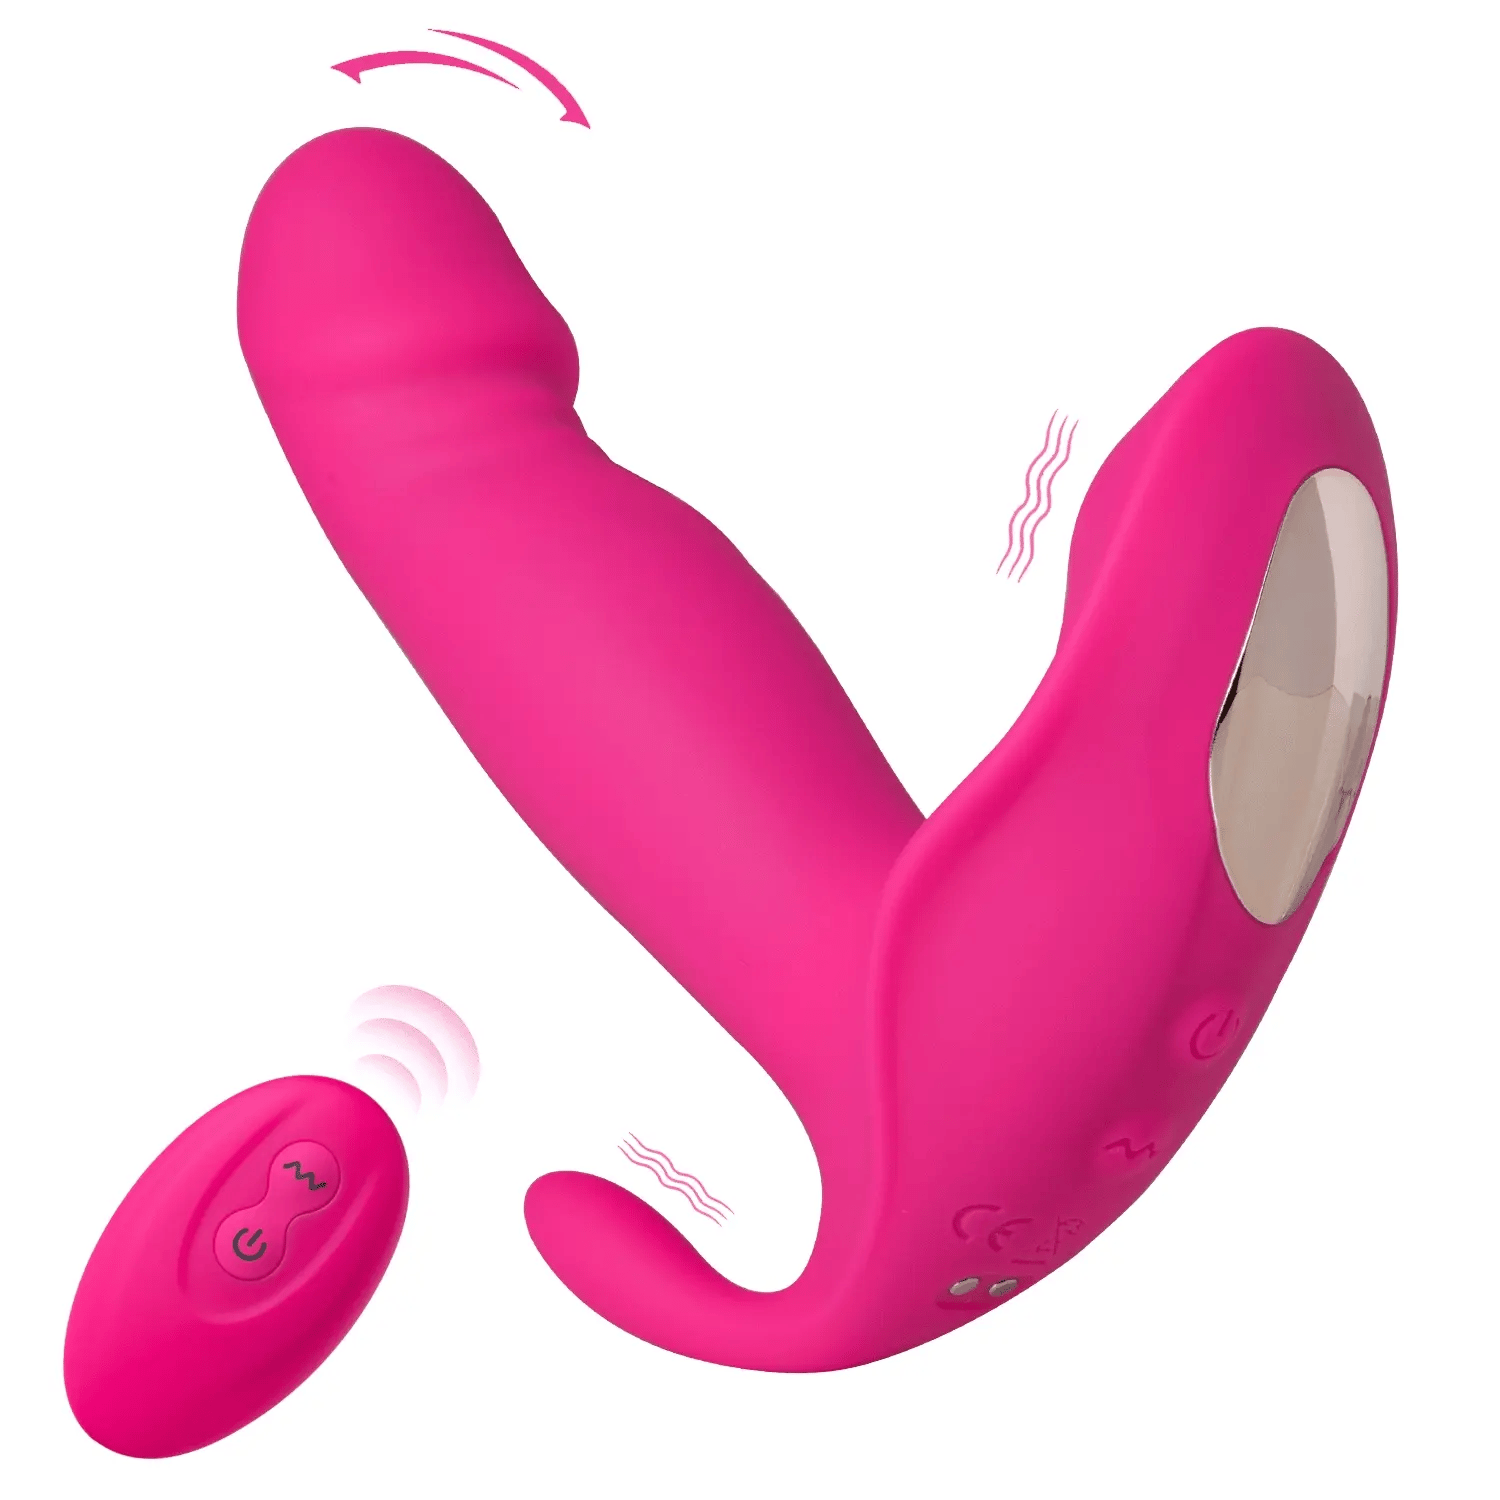 Norah - Remote Control Wearable Clit Massager Vibrating Tapping G-spot Vibrator